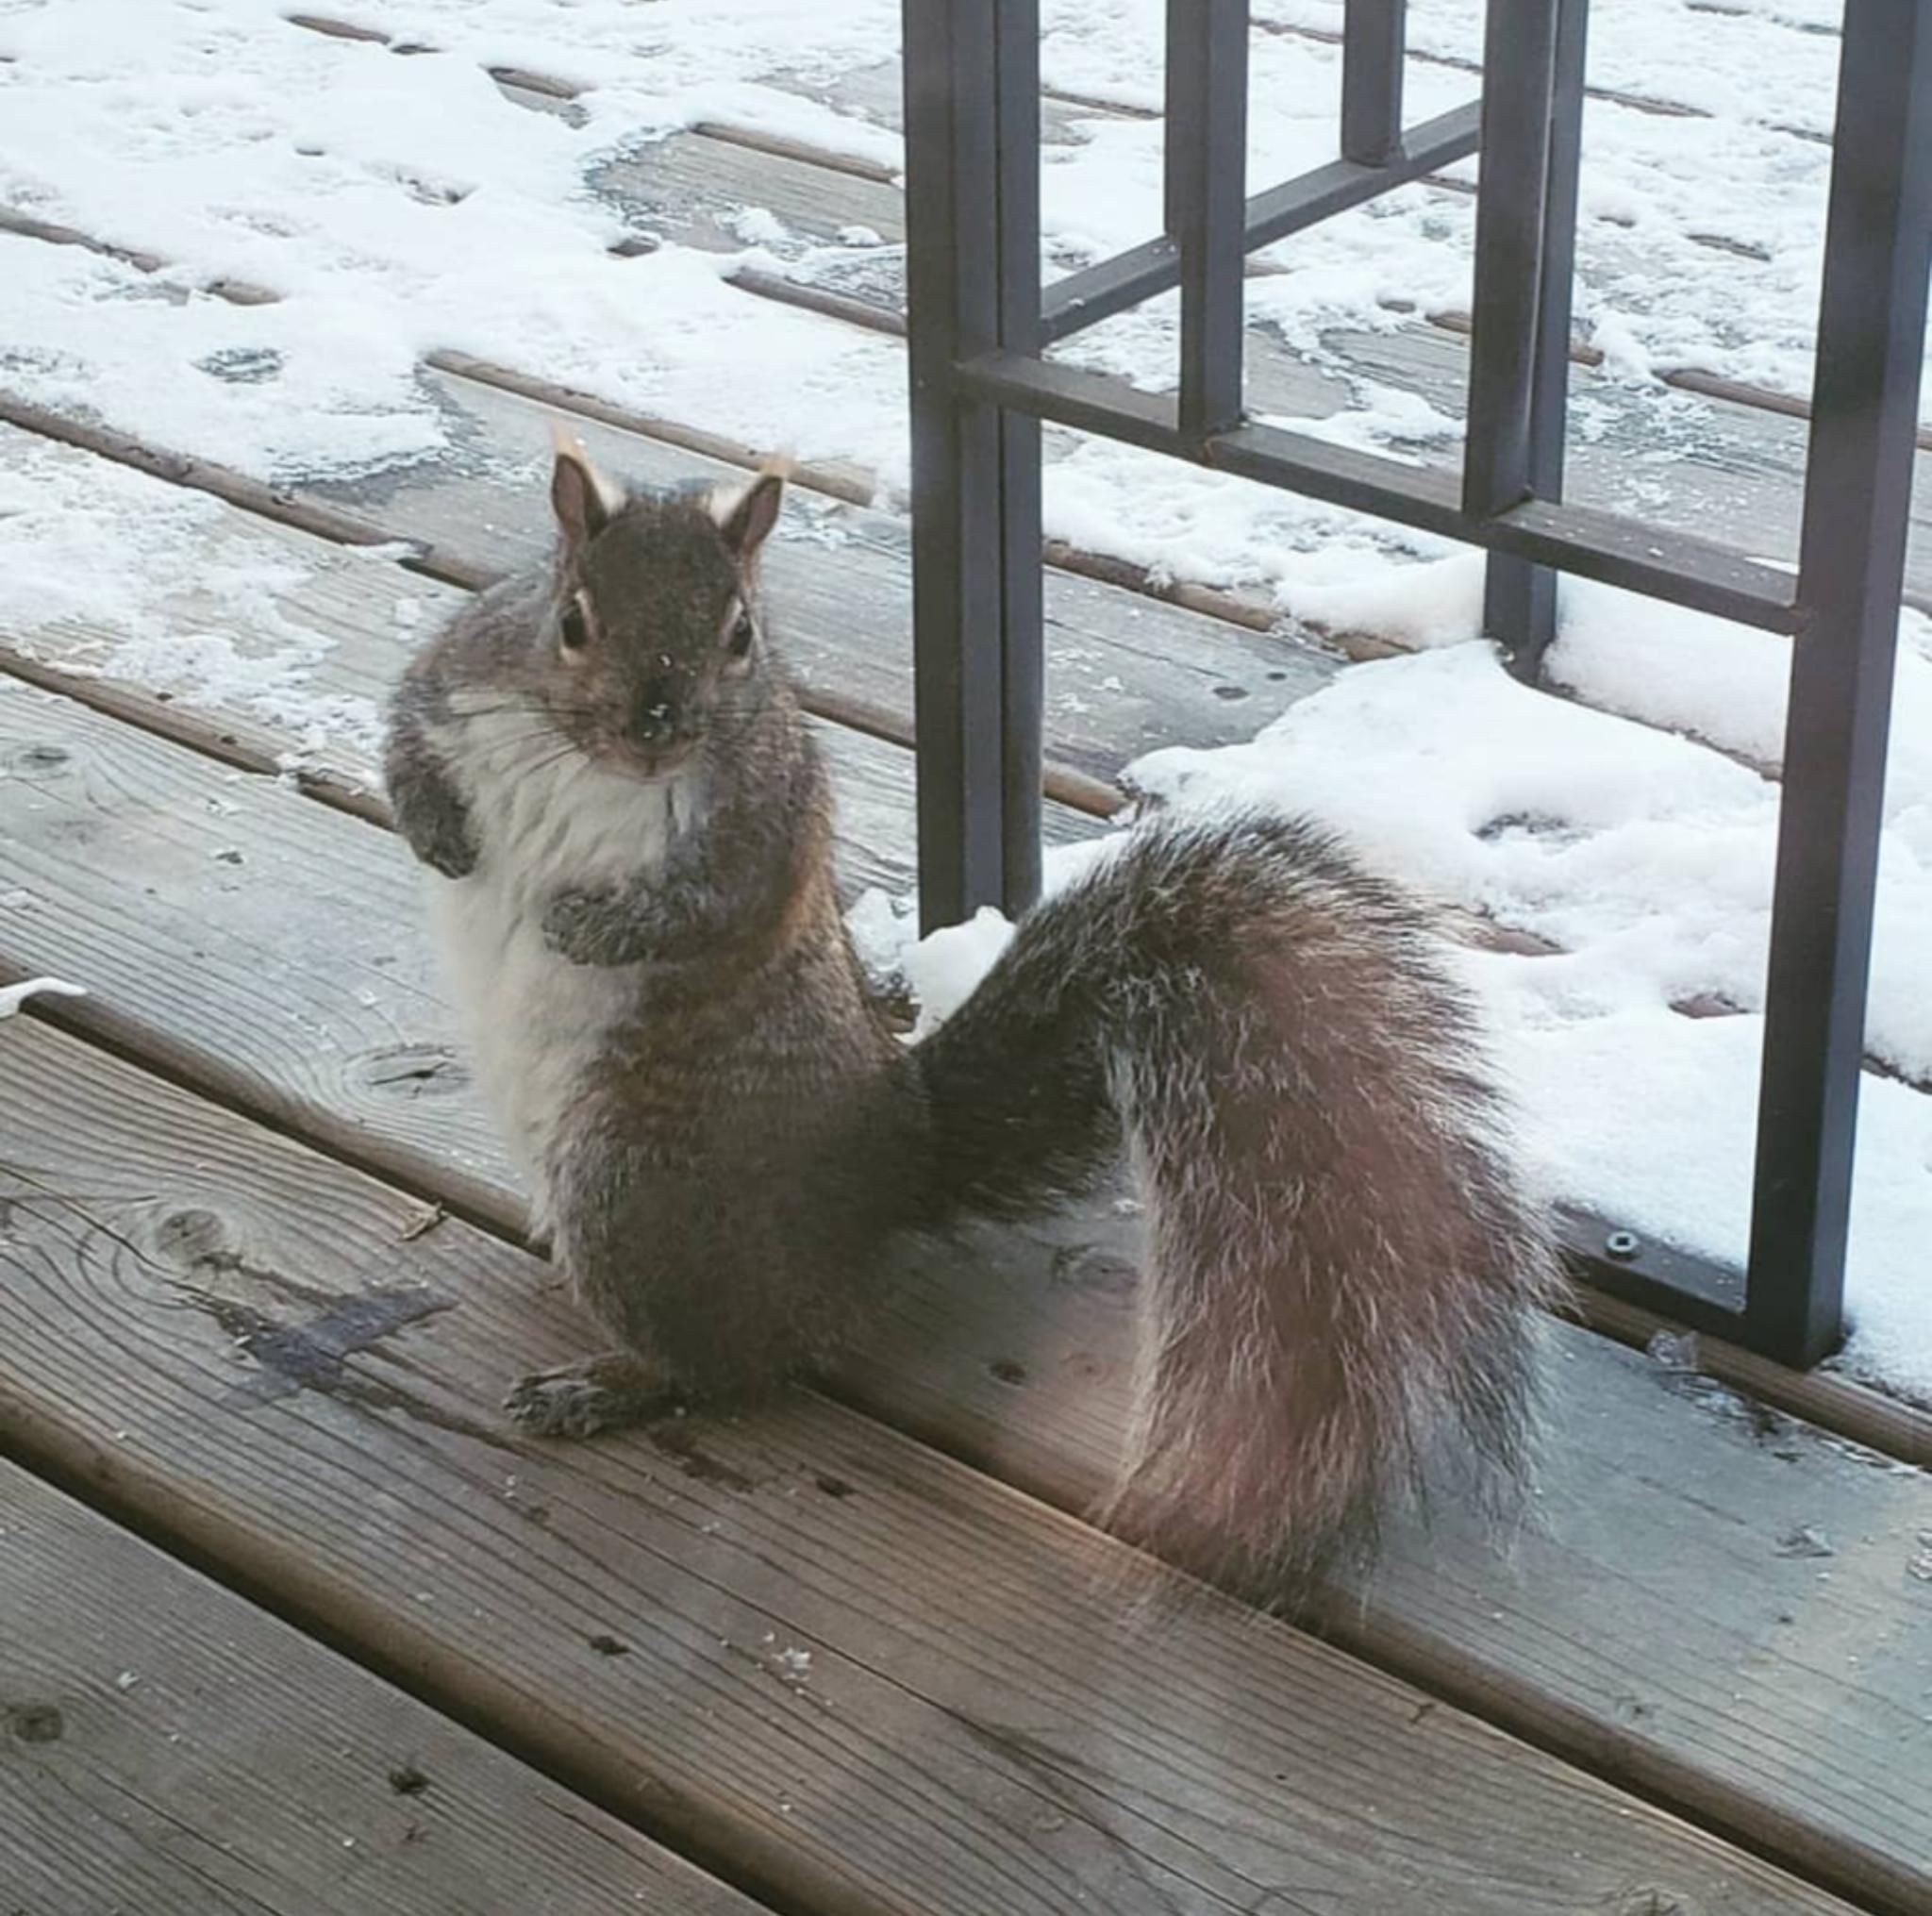 The size of this squirrel my dad has been feeding. Absolute unit.